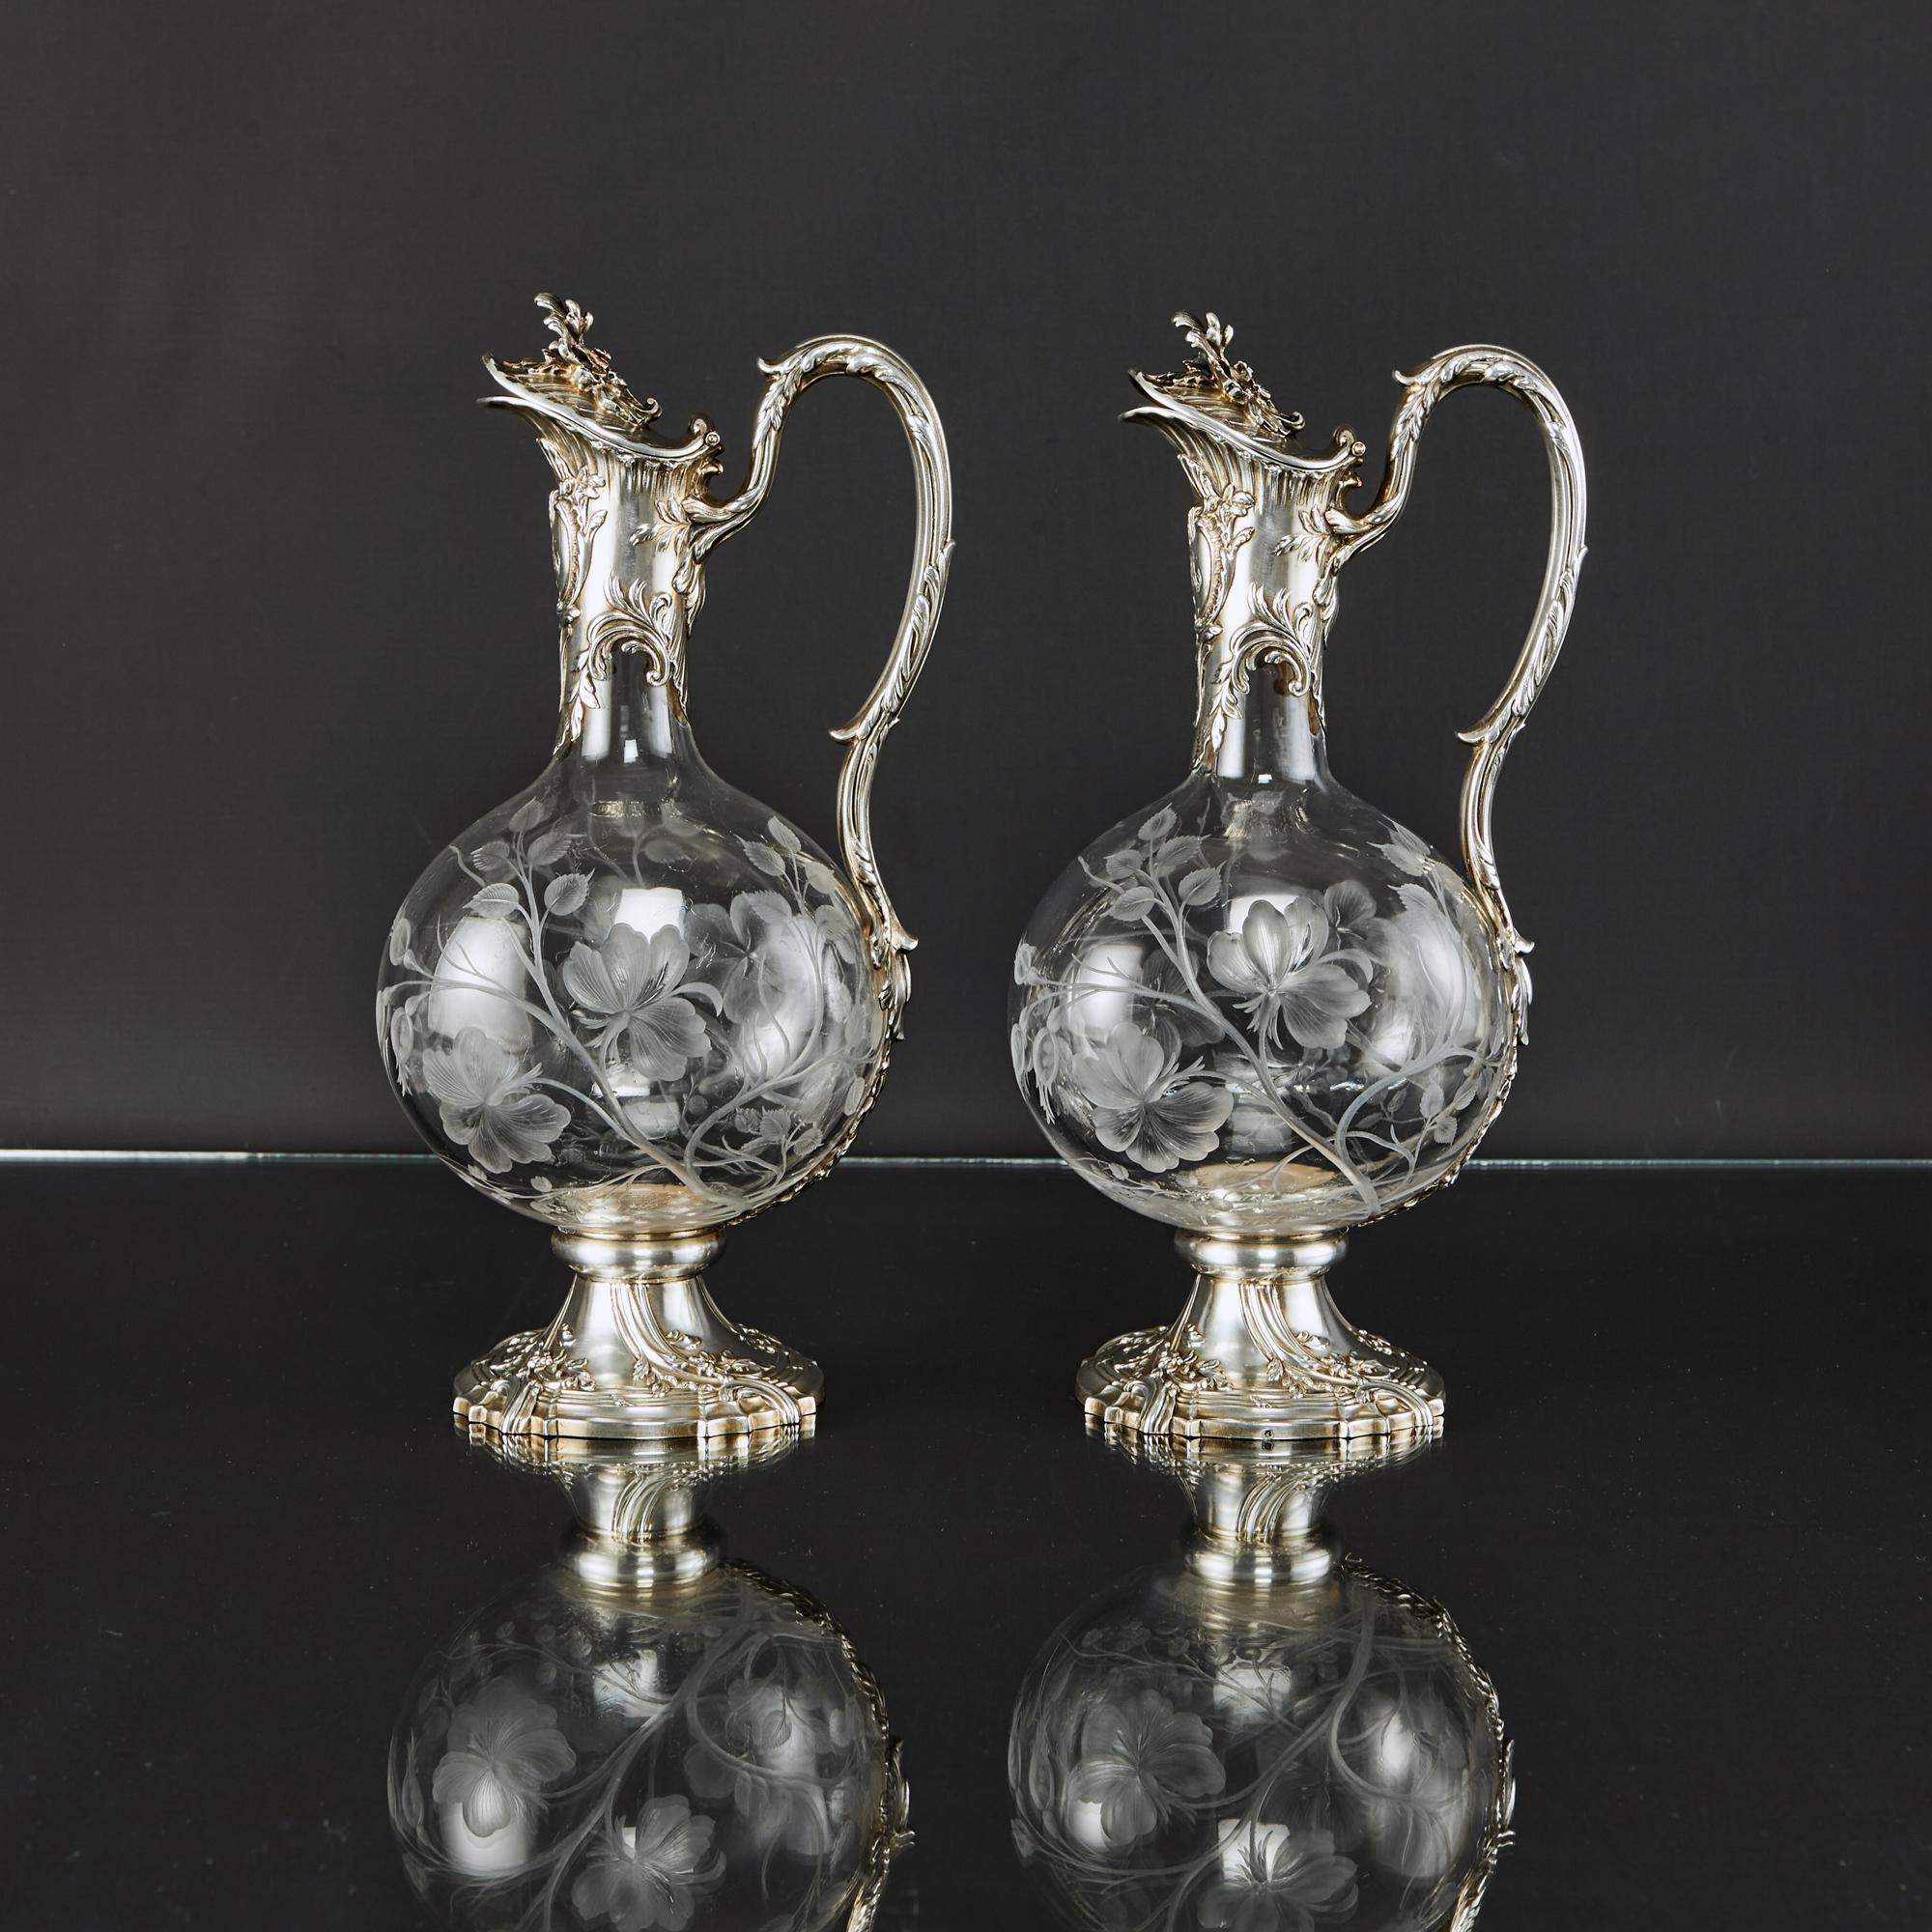 Pair of gorgeous late-19th-century antique silver and etched glass wine jugs in the Louis XV style. The baluster-shaped glass bodies are delicately hand engraved in fine detail showing branches of leaves and blossoms.

The 1st quality (.950)